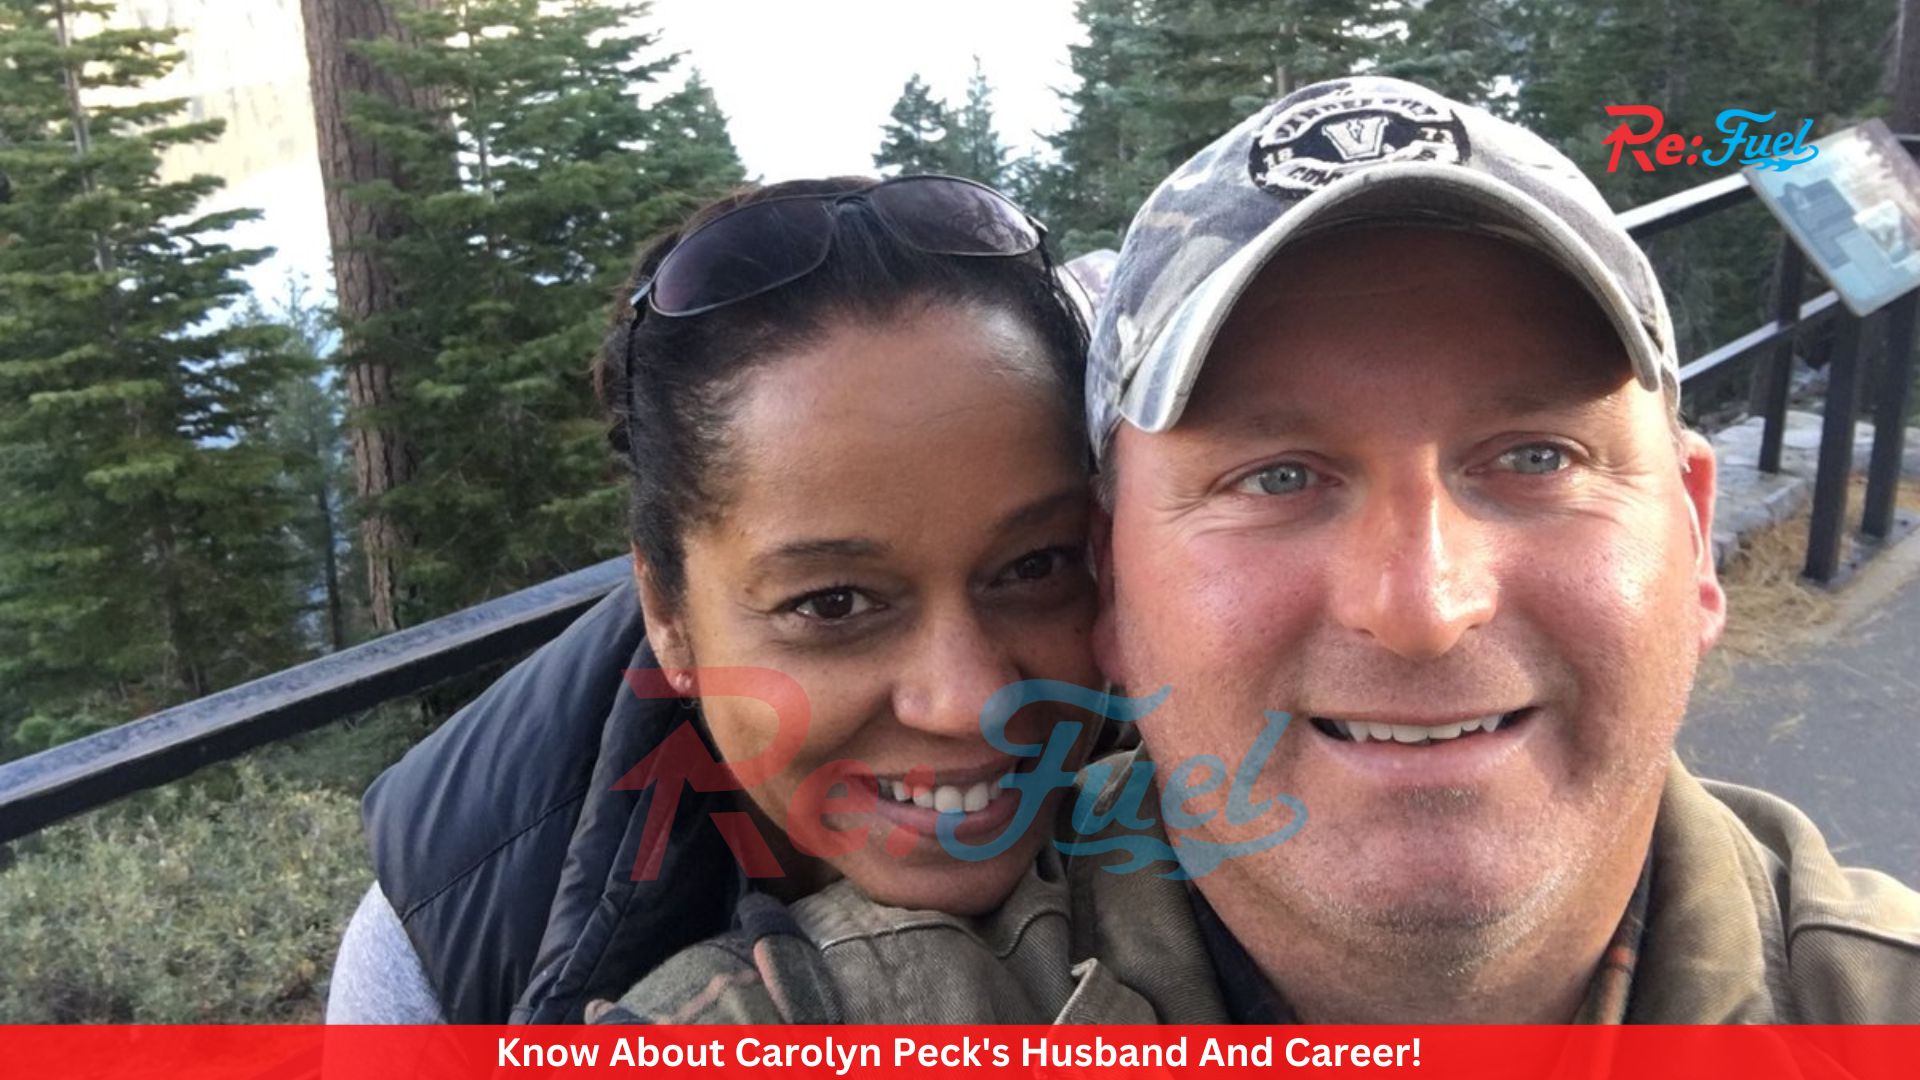 Know About Carolyn Peck's Husband And Career!